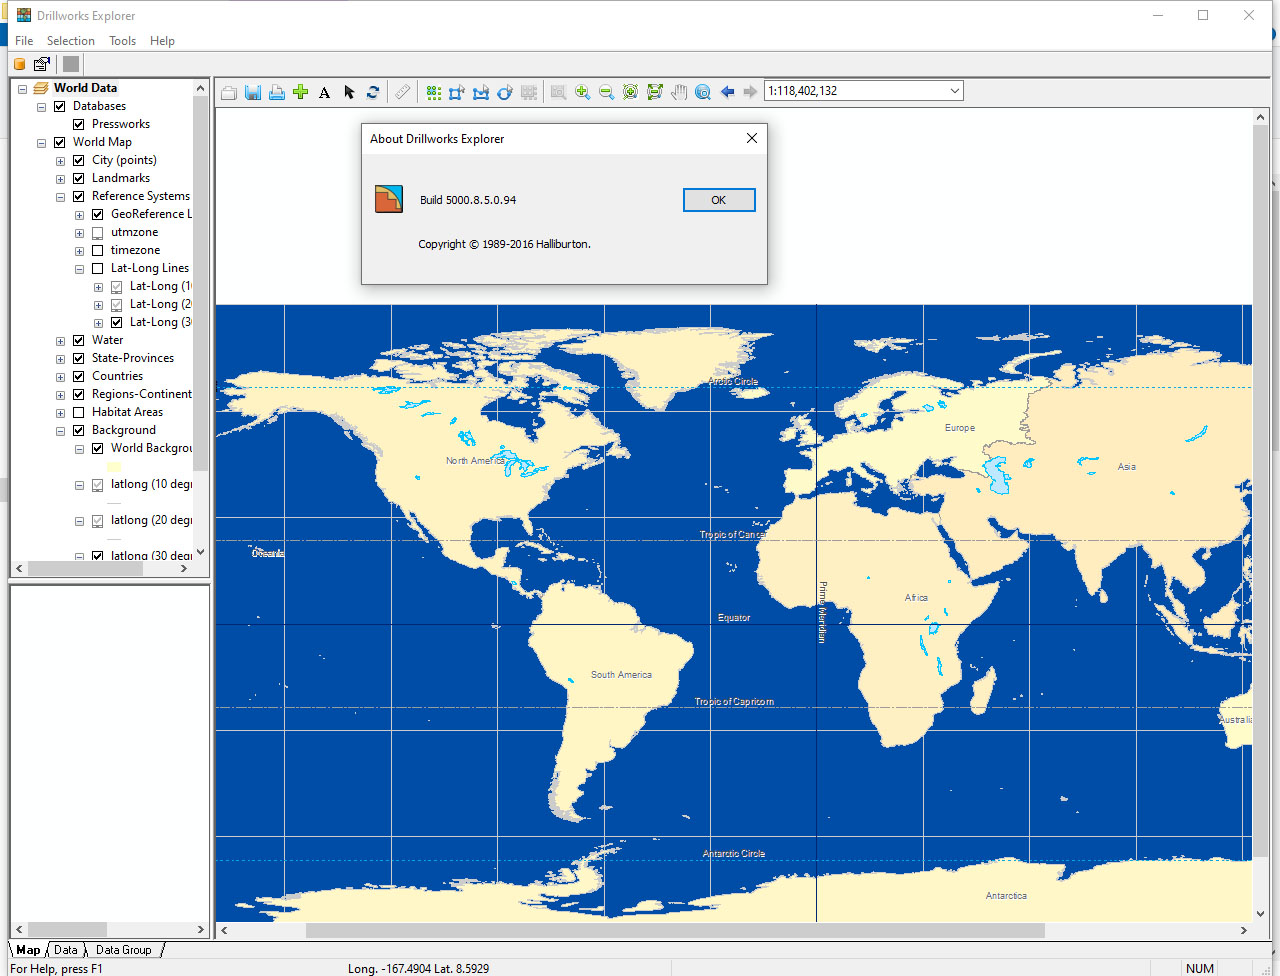 Drillworks 5000.8.5.0 with ArcGIS10.3